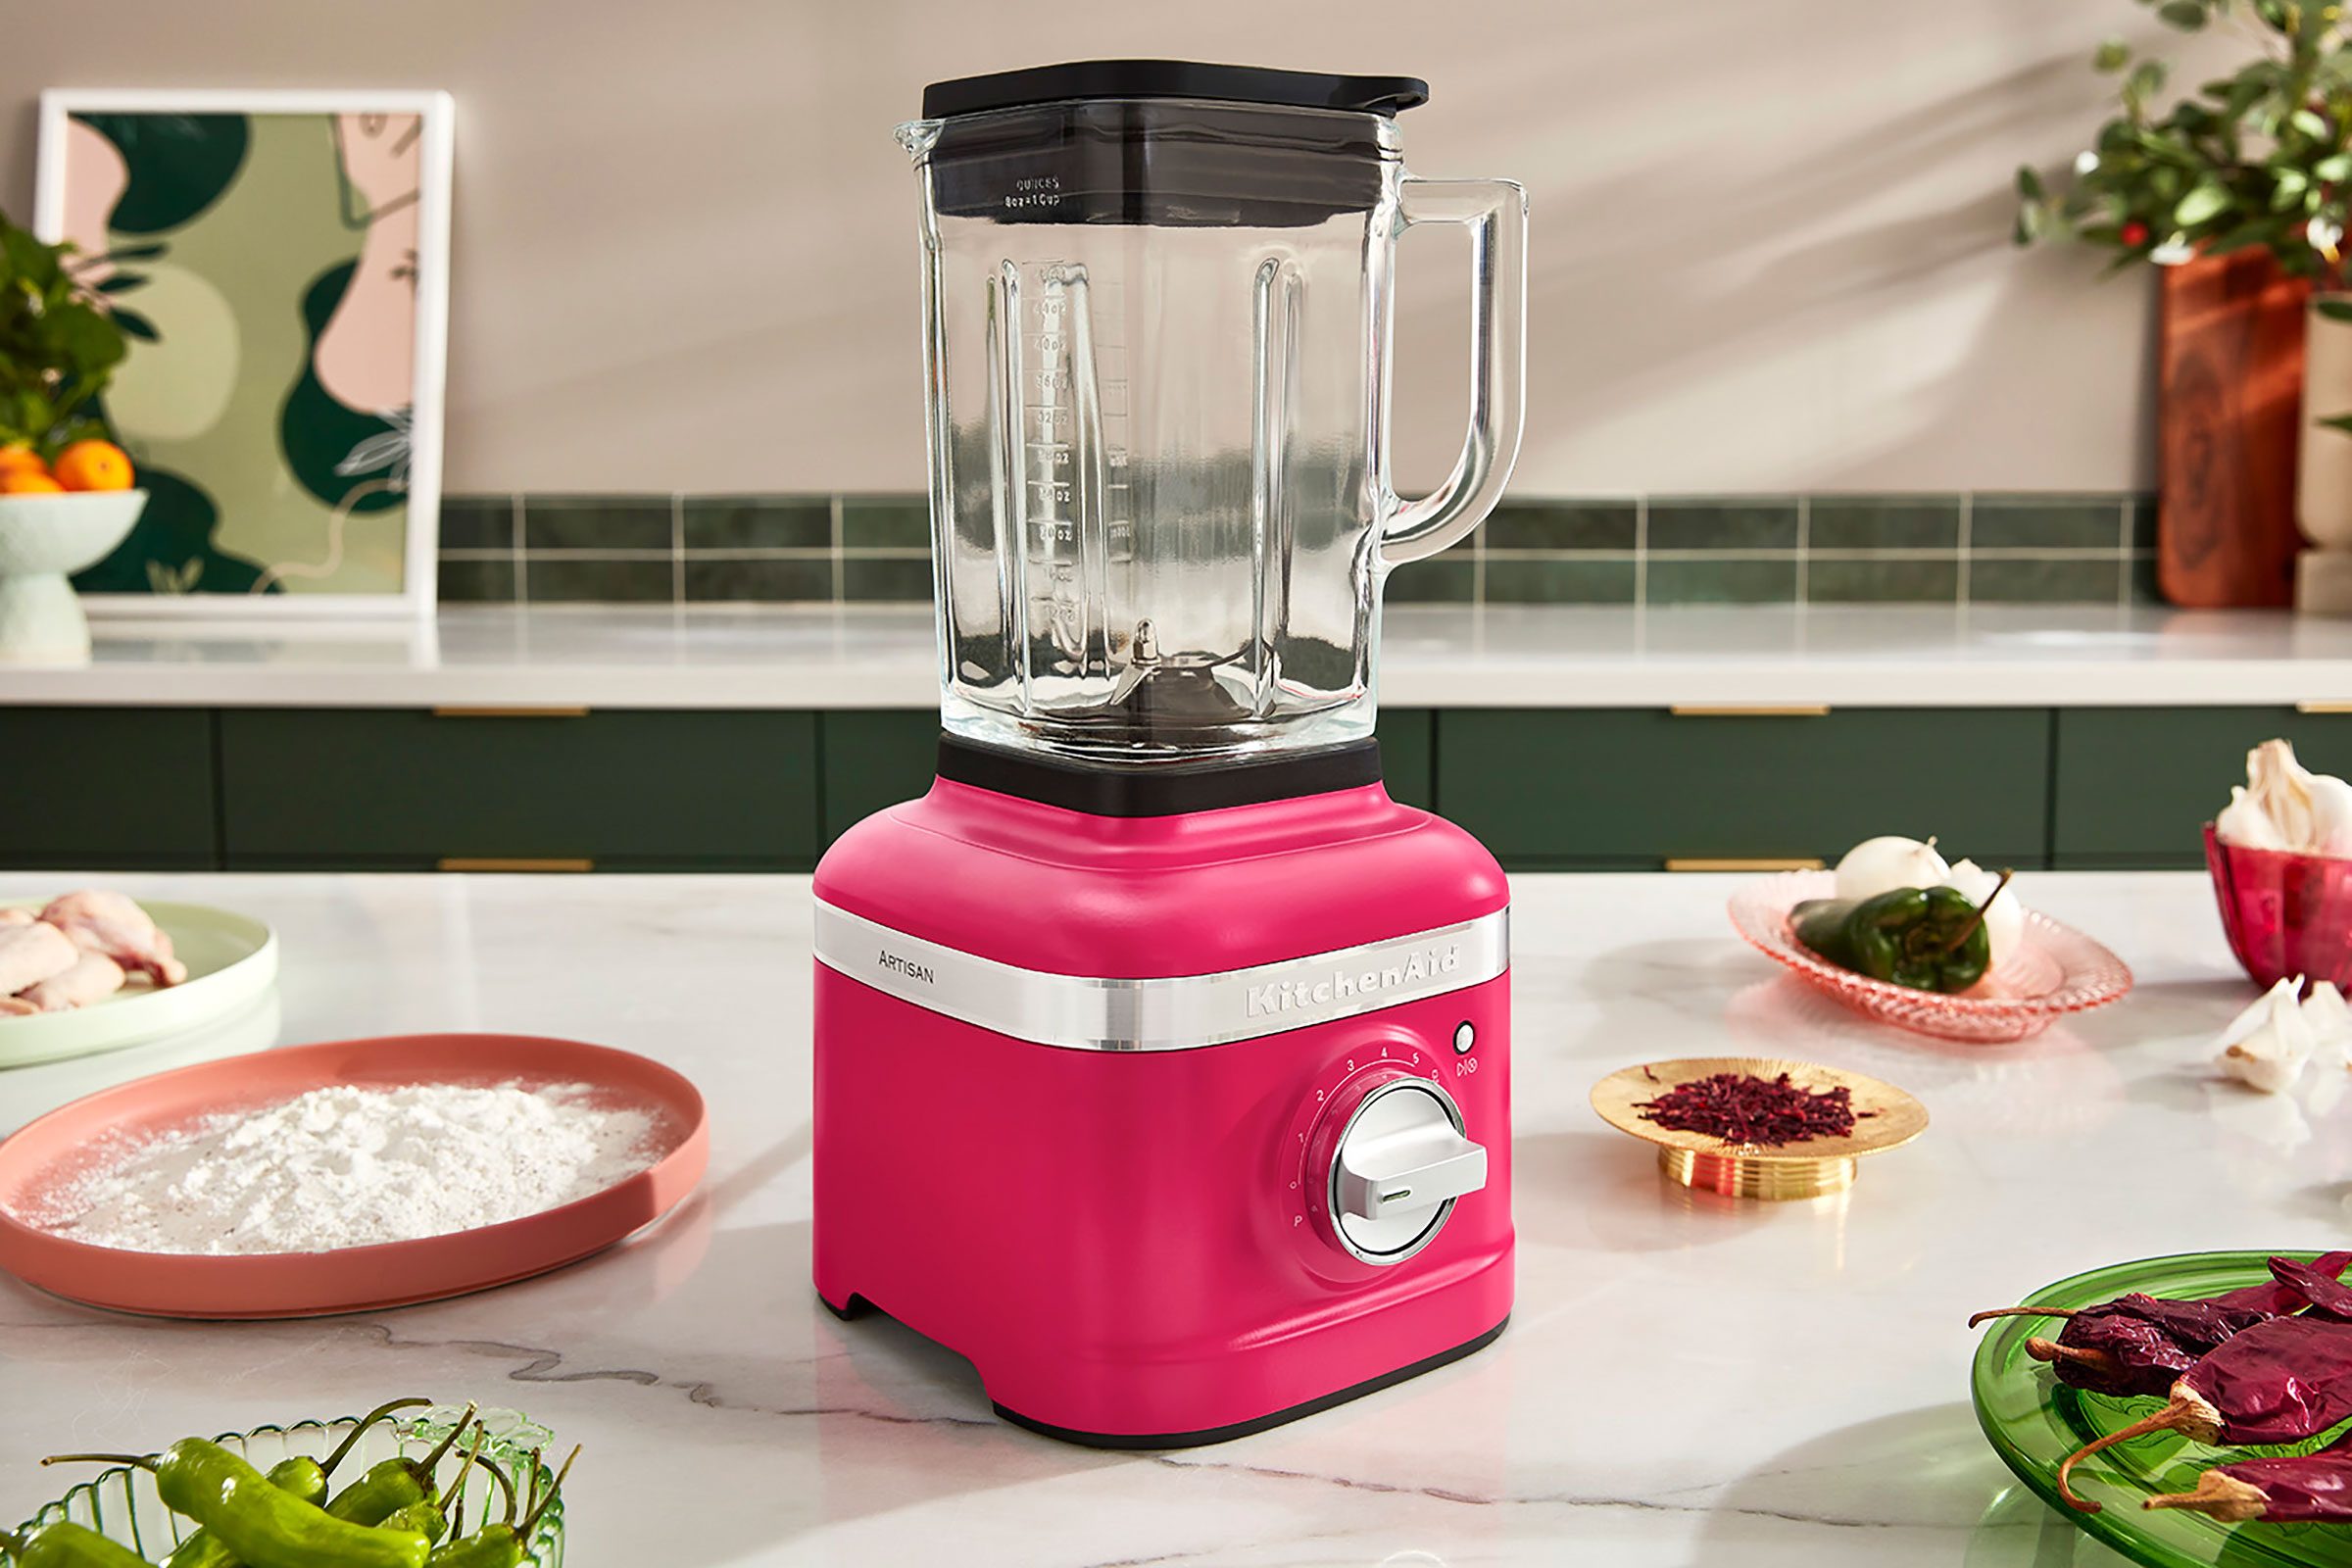 https://www.tasteofhome.com/wp-content/uploads/2022/02/Kitchen-Aid-Color-of-the-Year-2023-Hibiscus-Blender-Resize-Crop-Courtesy-Kitchen-Aid.jpg?fit=680%2C454